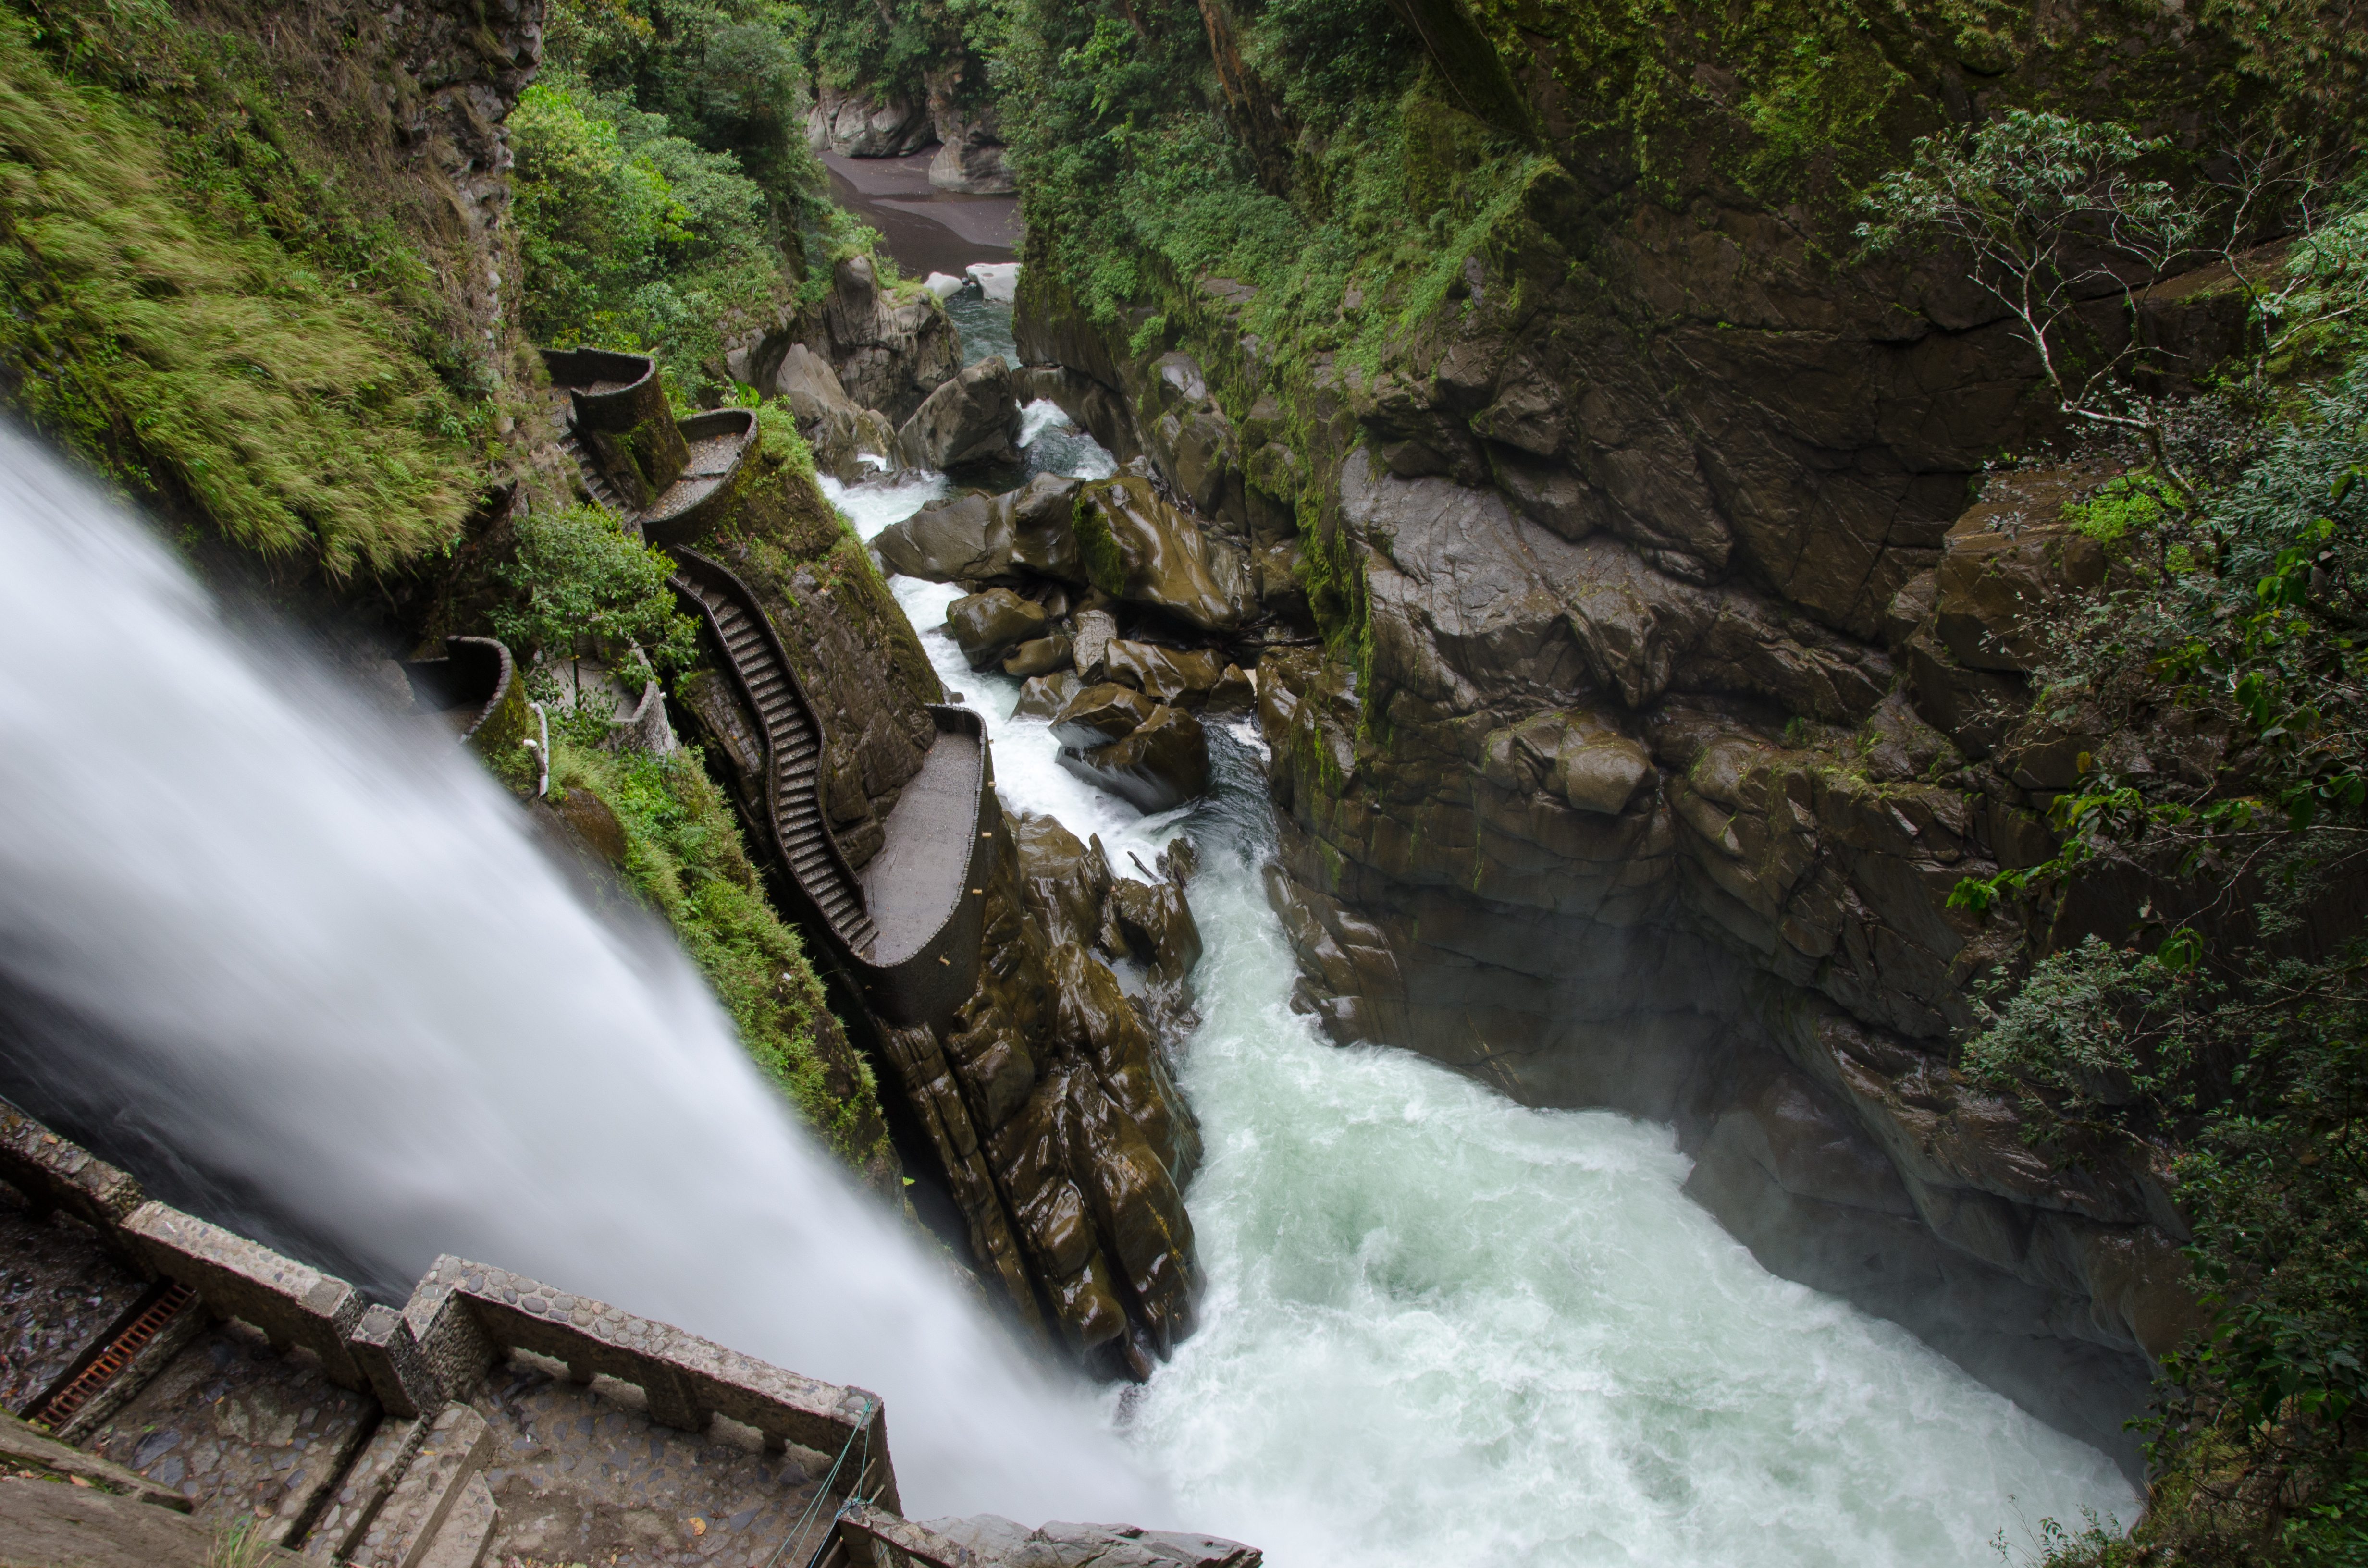 Postcards From Ecuador…Waterfalls of the Andes